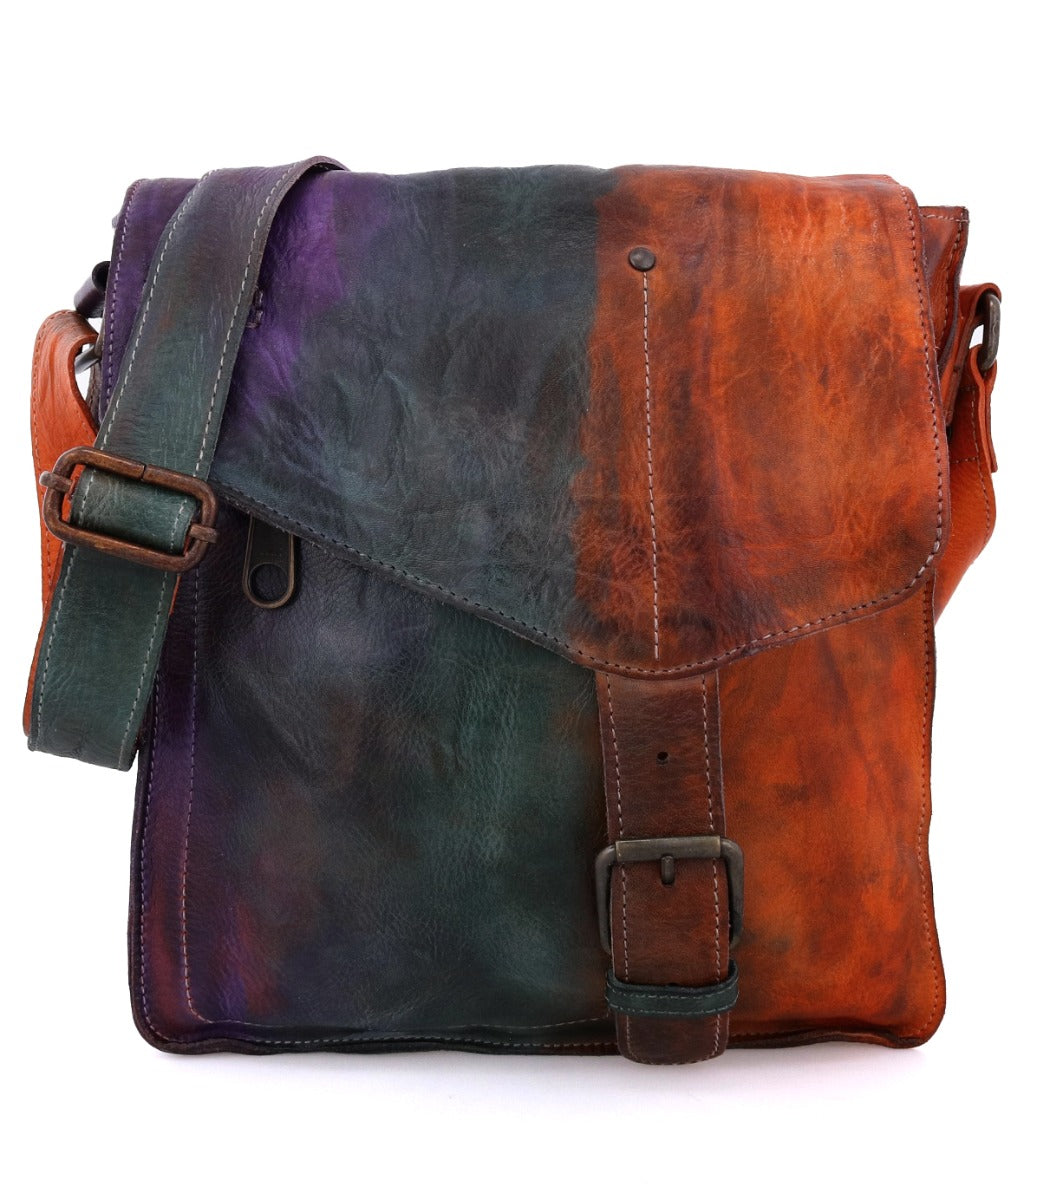 A colorful Venice Beach leather bag with a strap, from the Bed Stu.